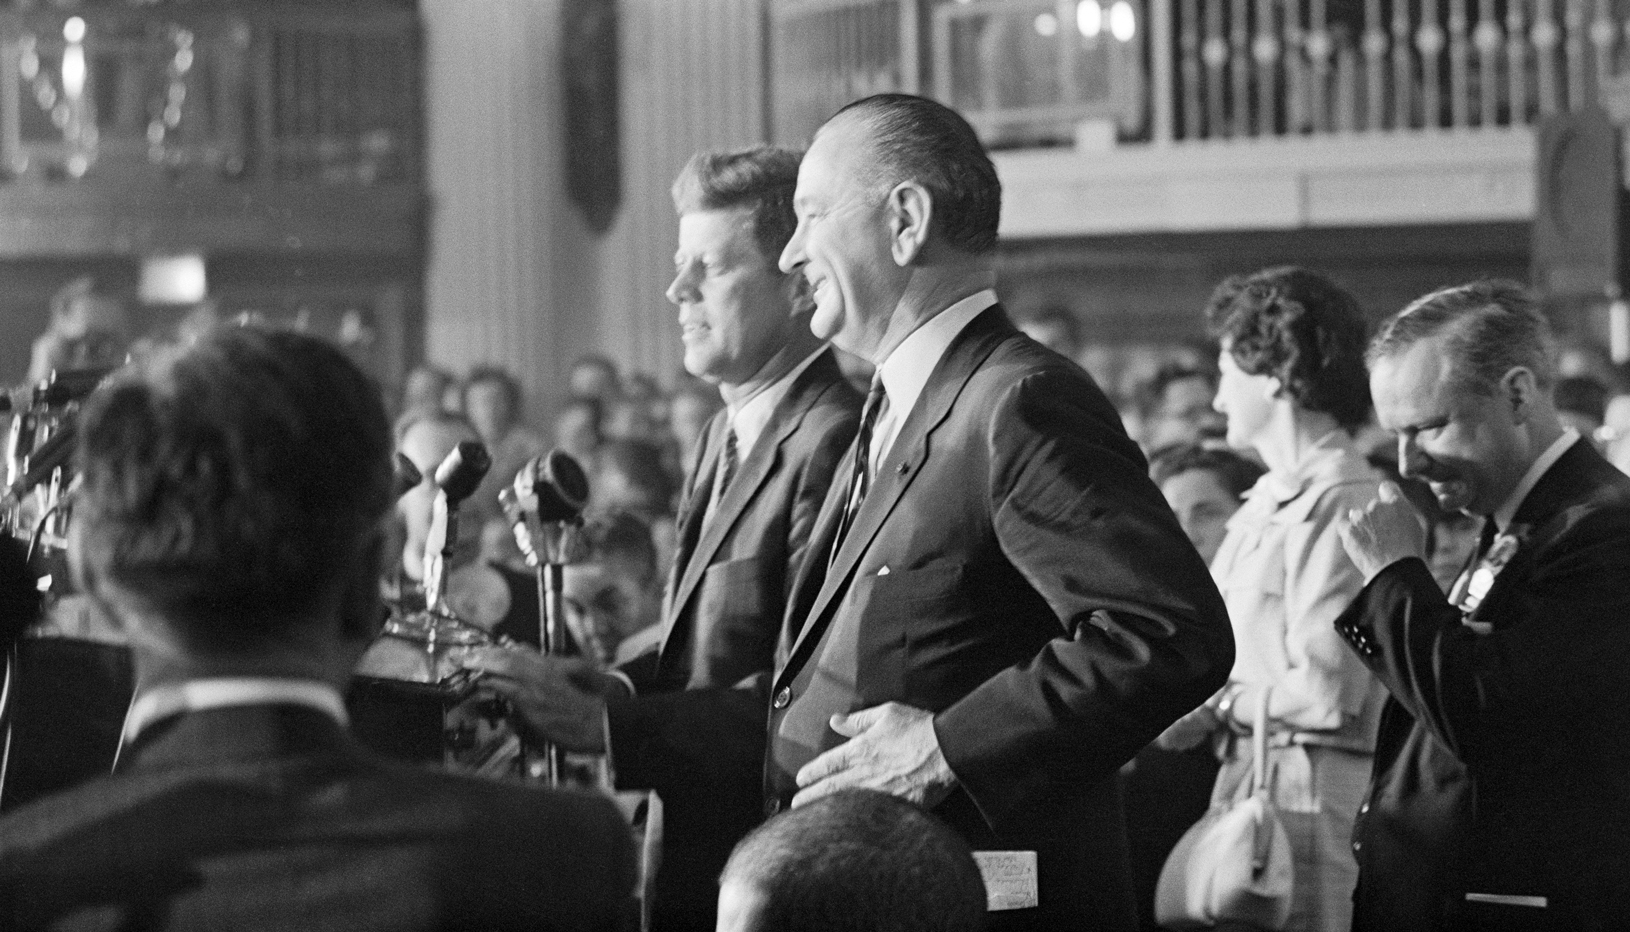 John F. Kennedy and Lyndon Johnson stand together at a podium.